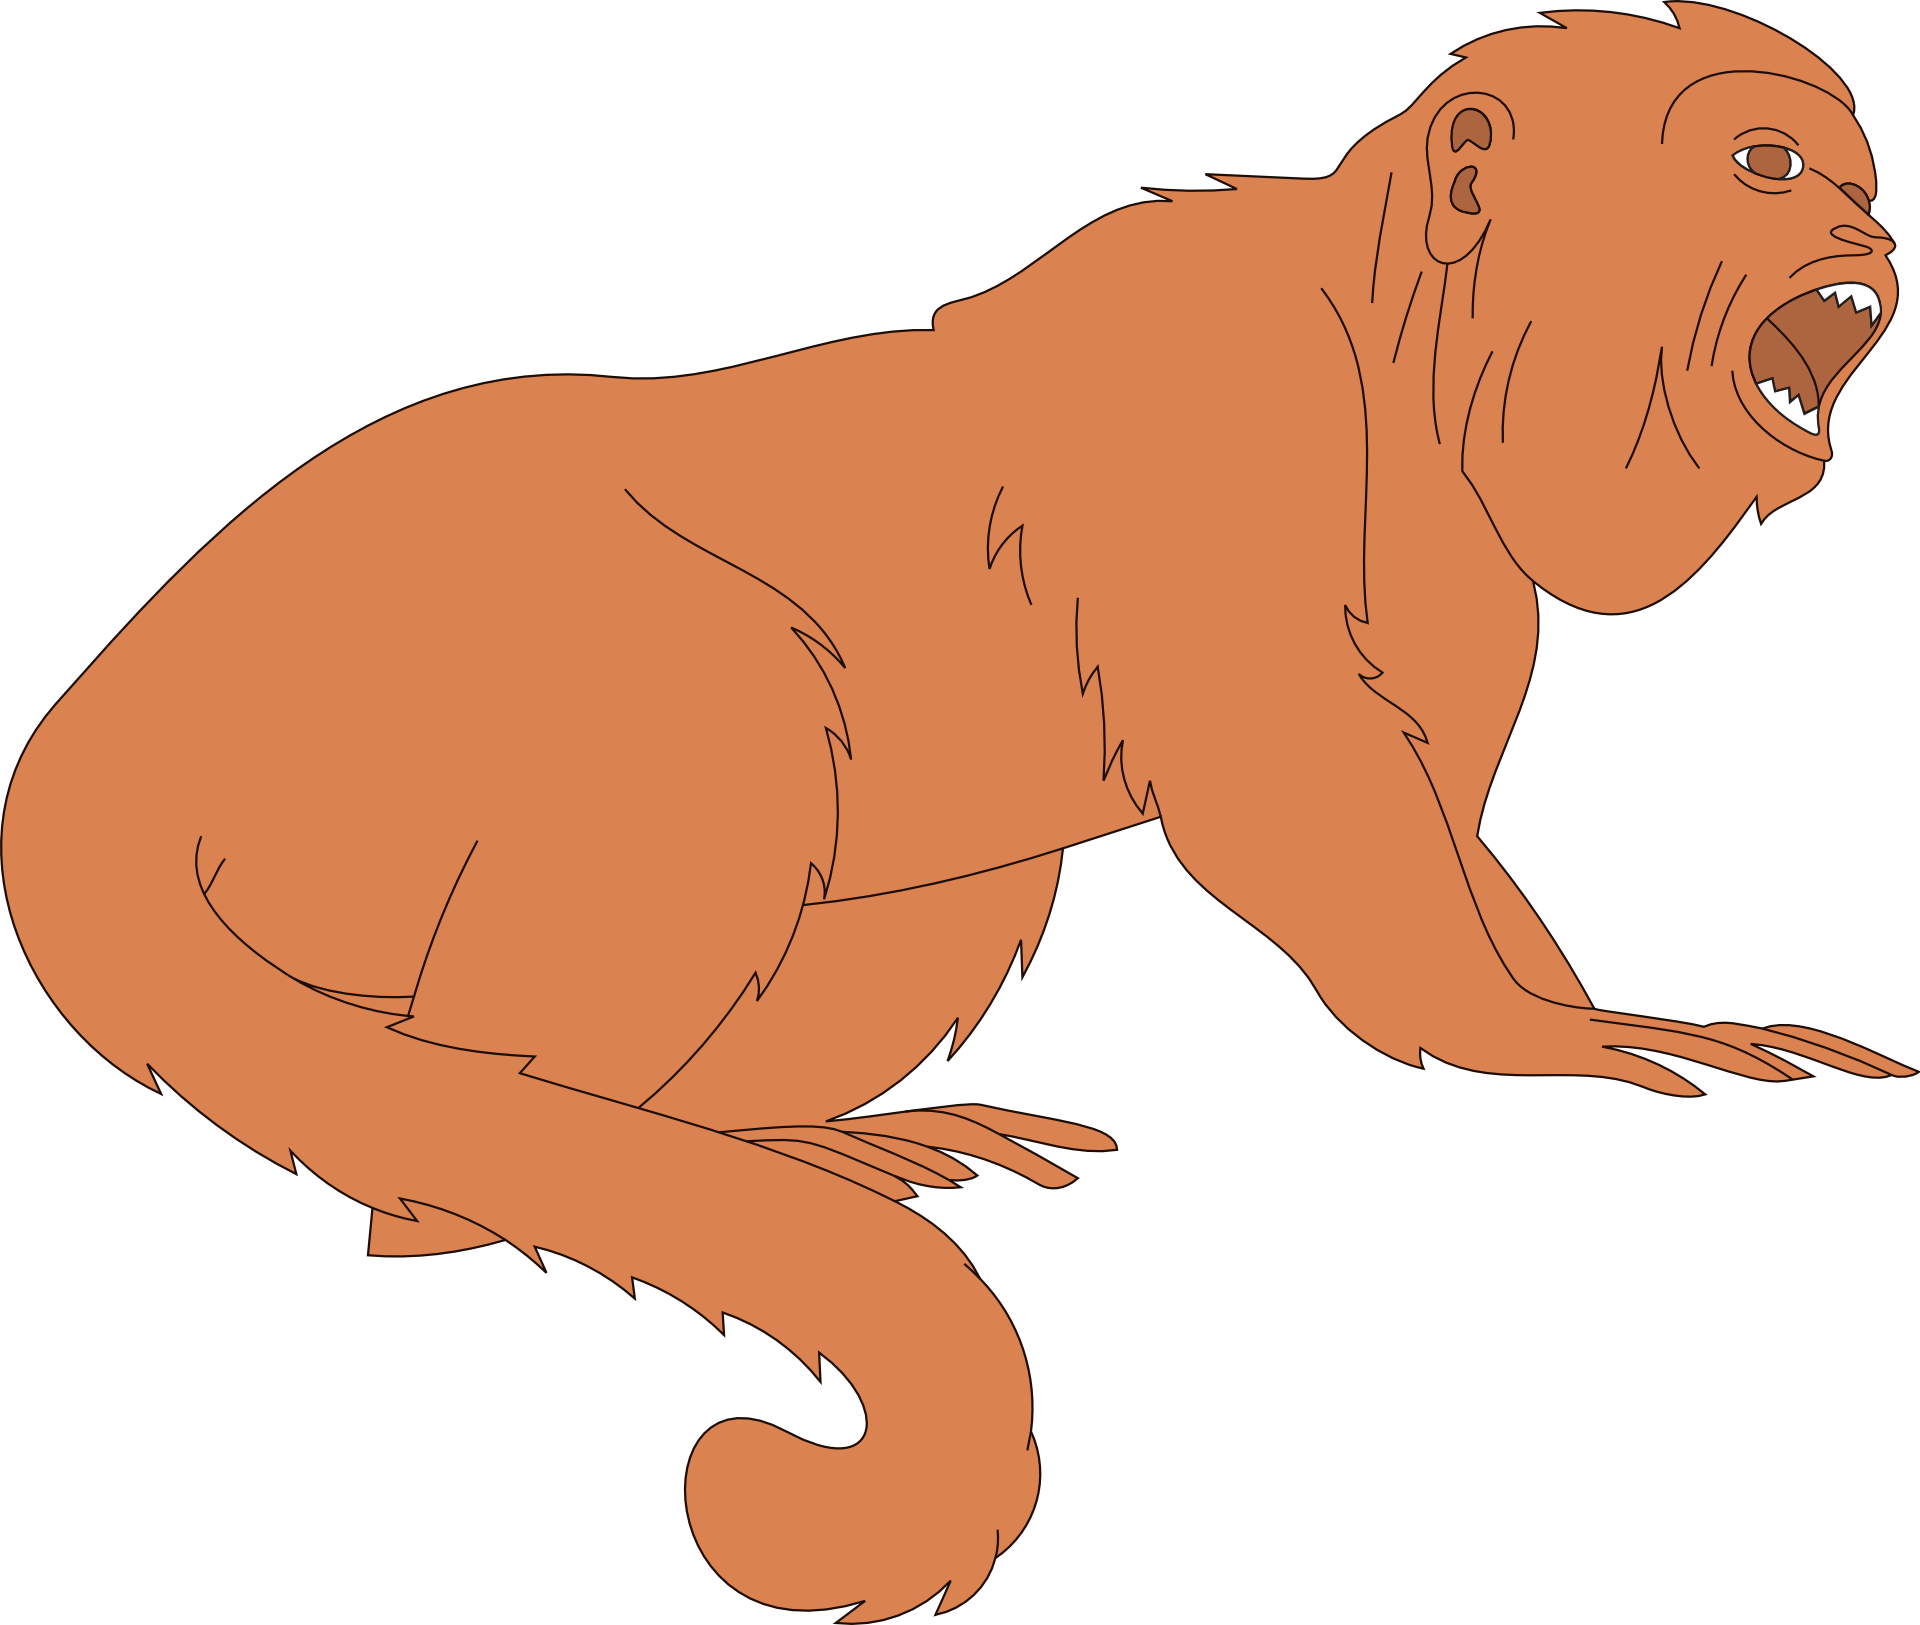 Monkey as a drawing free image download